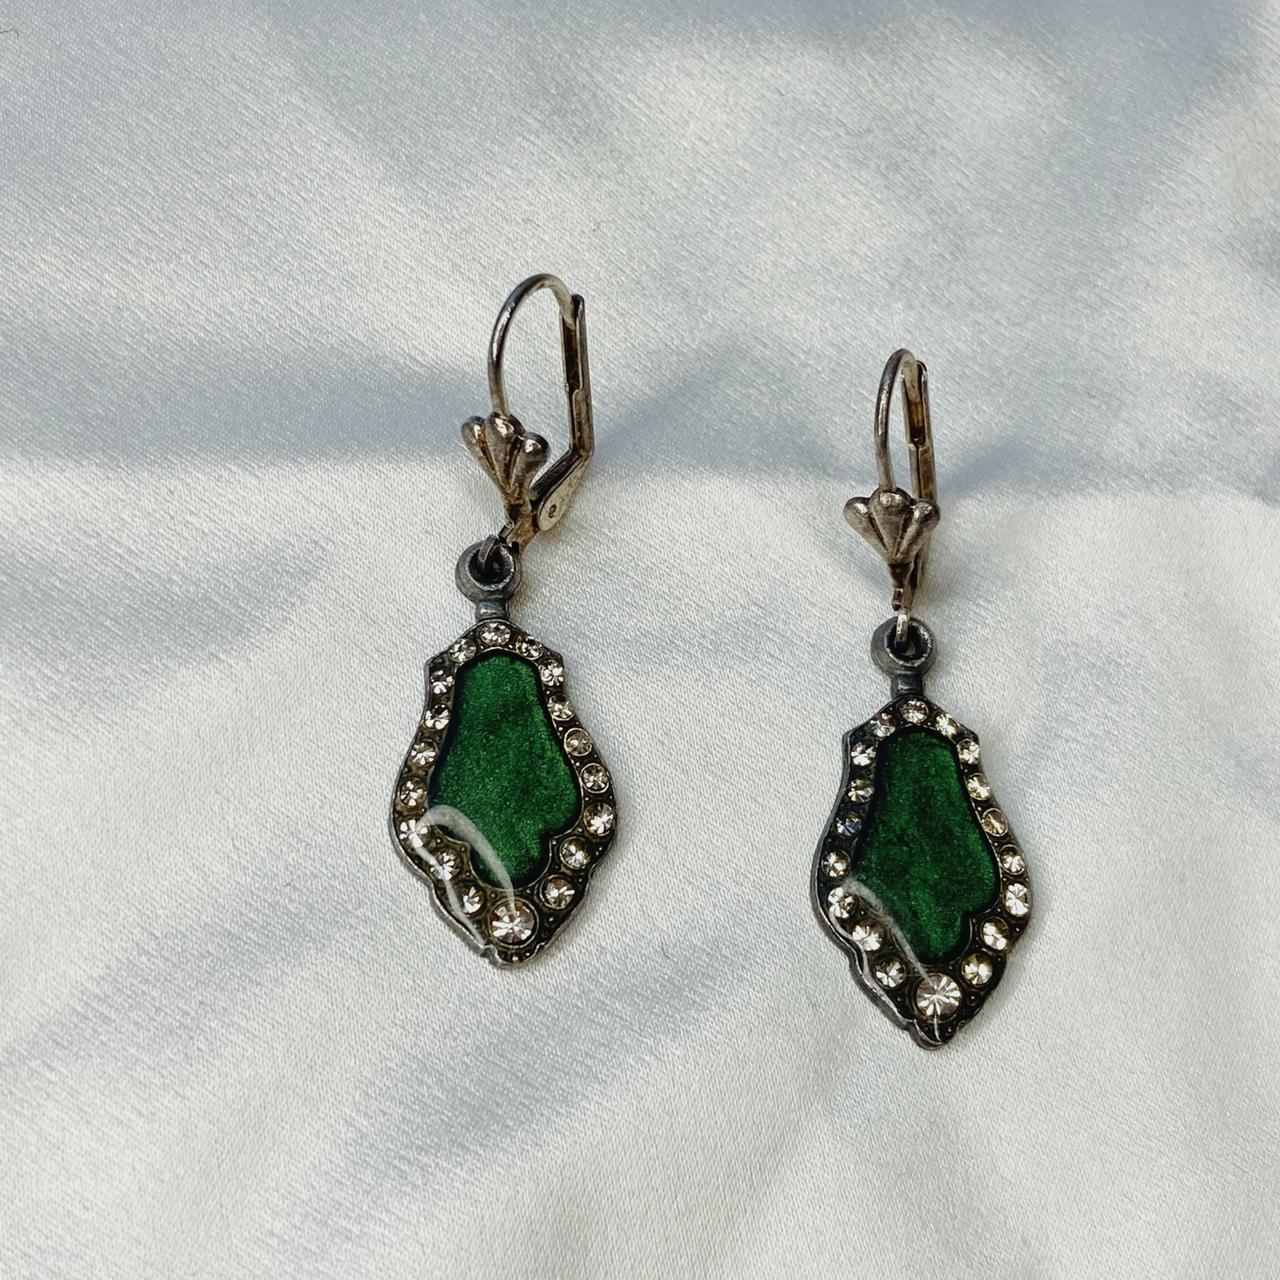 Product Image 1 - Green and silver vintage earrings